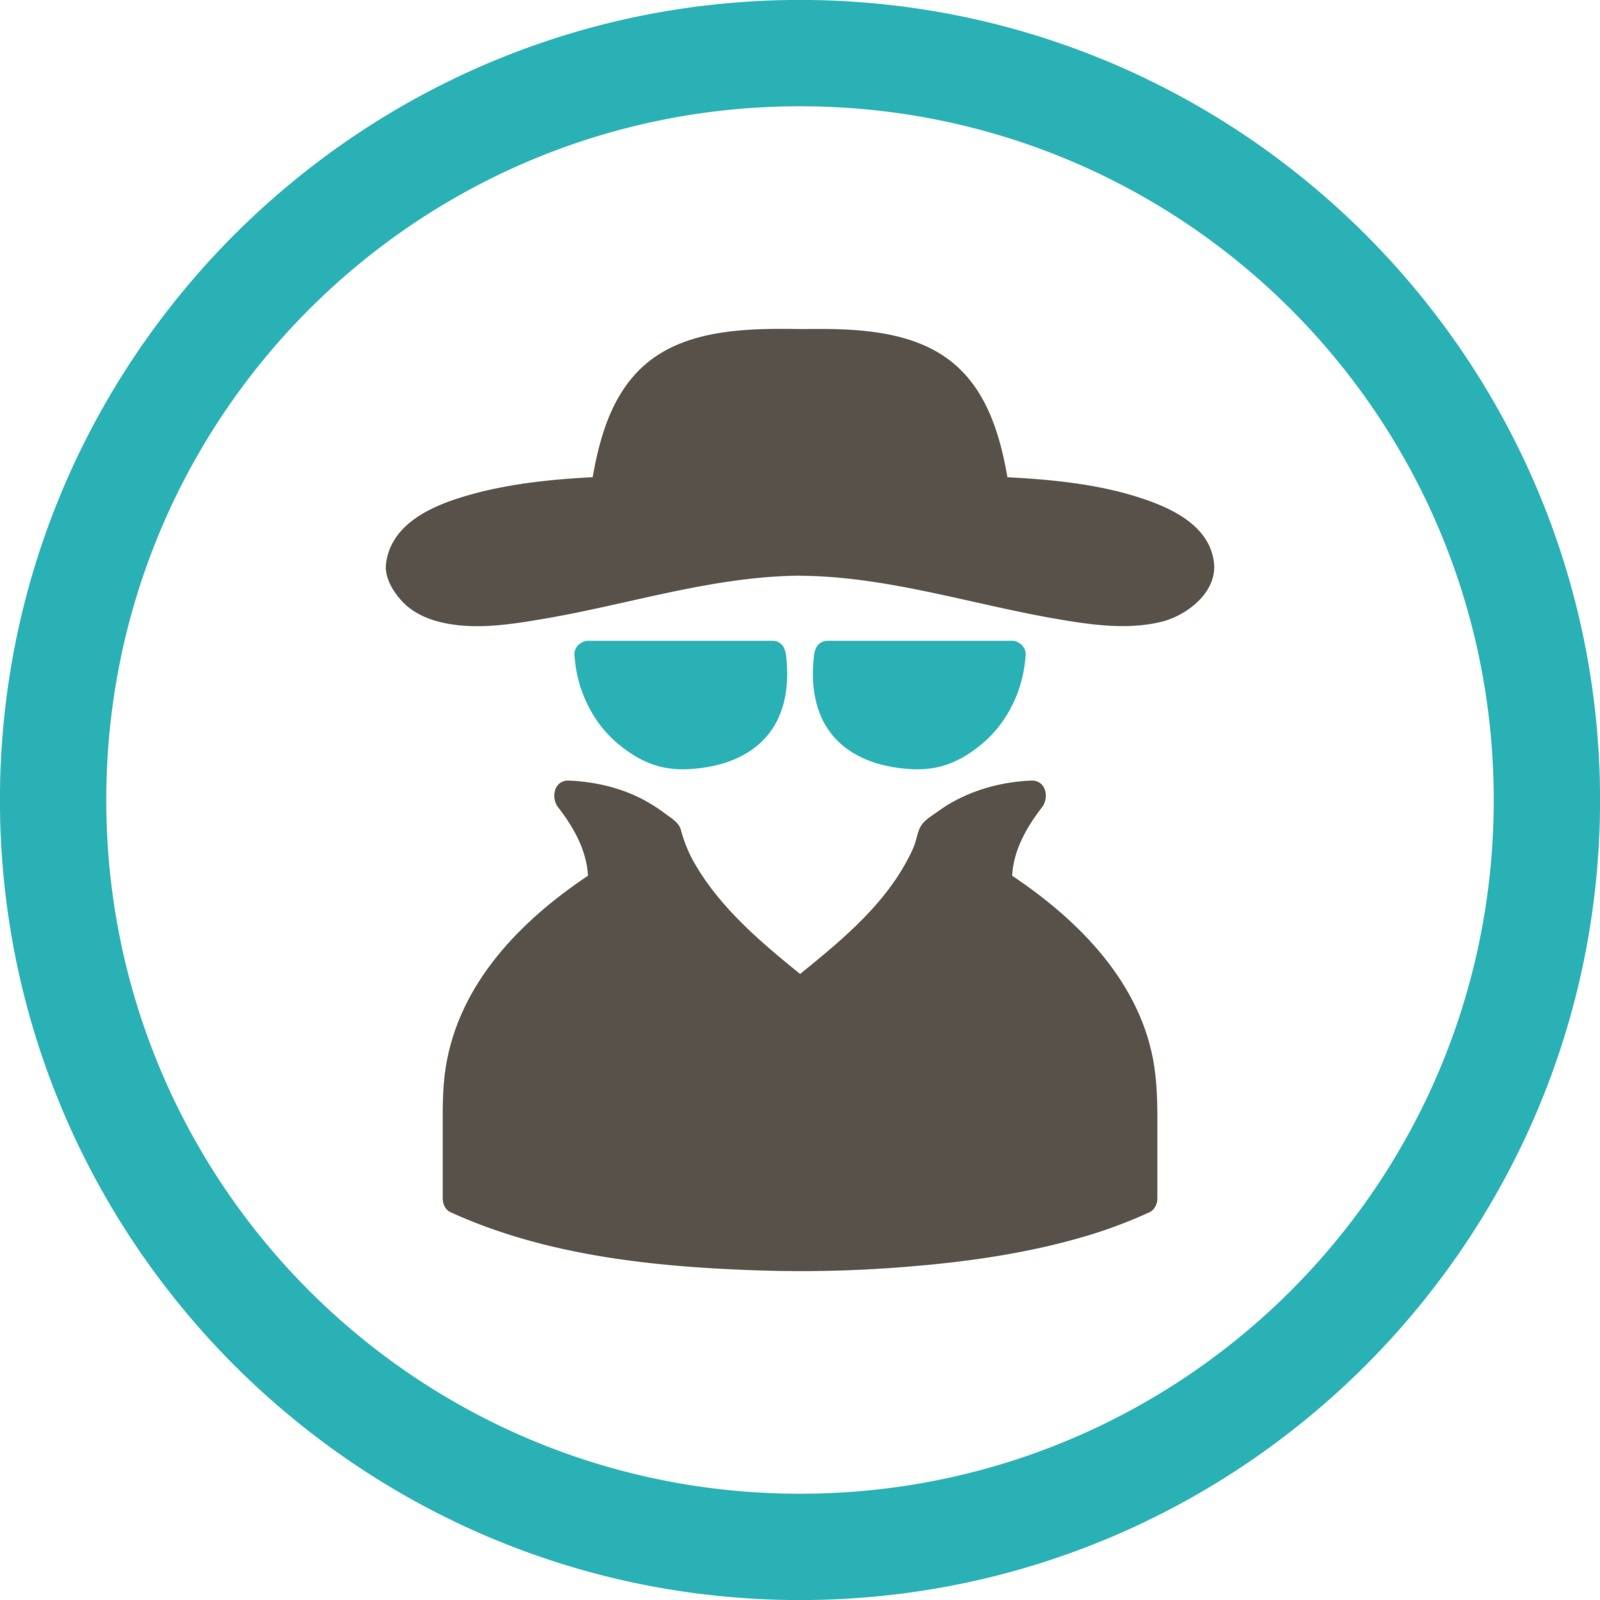 Spy vector icon. This rounded flat symbol is drawn with grey and cyan colors on a white background.